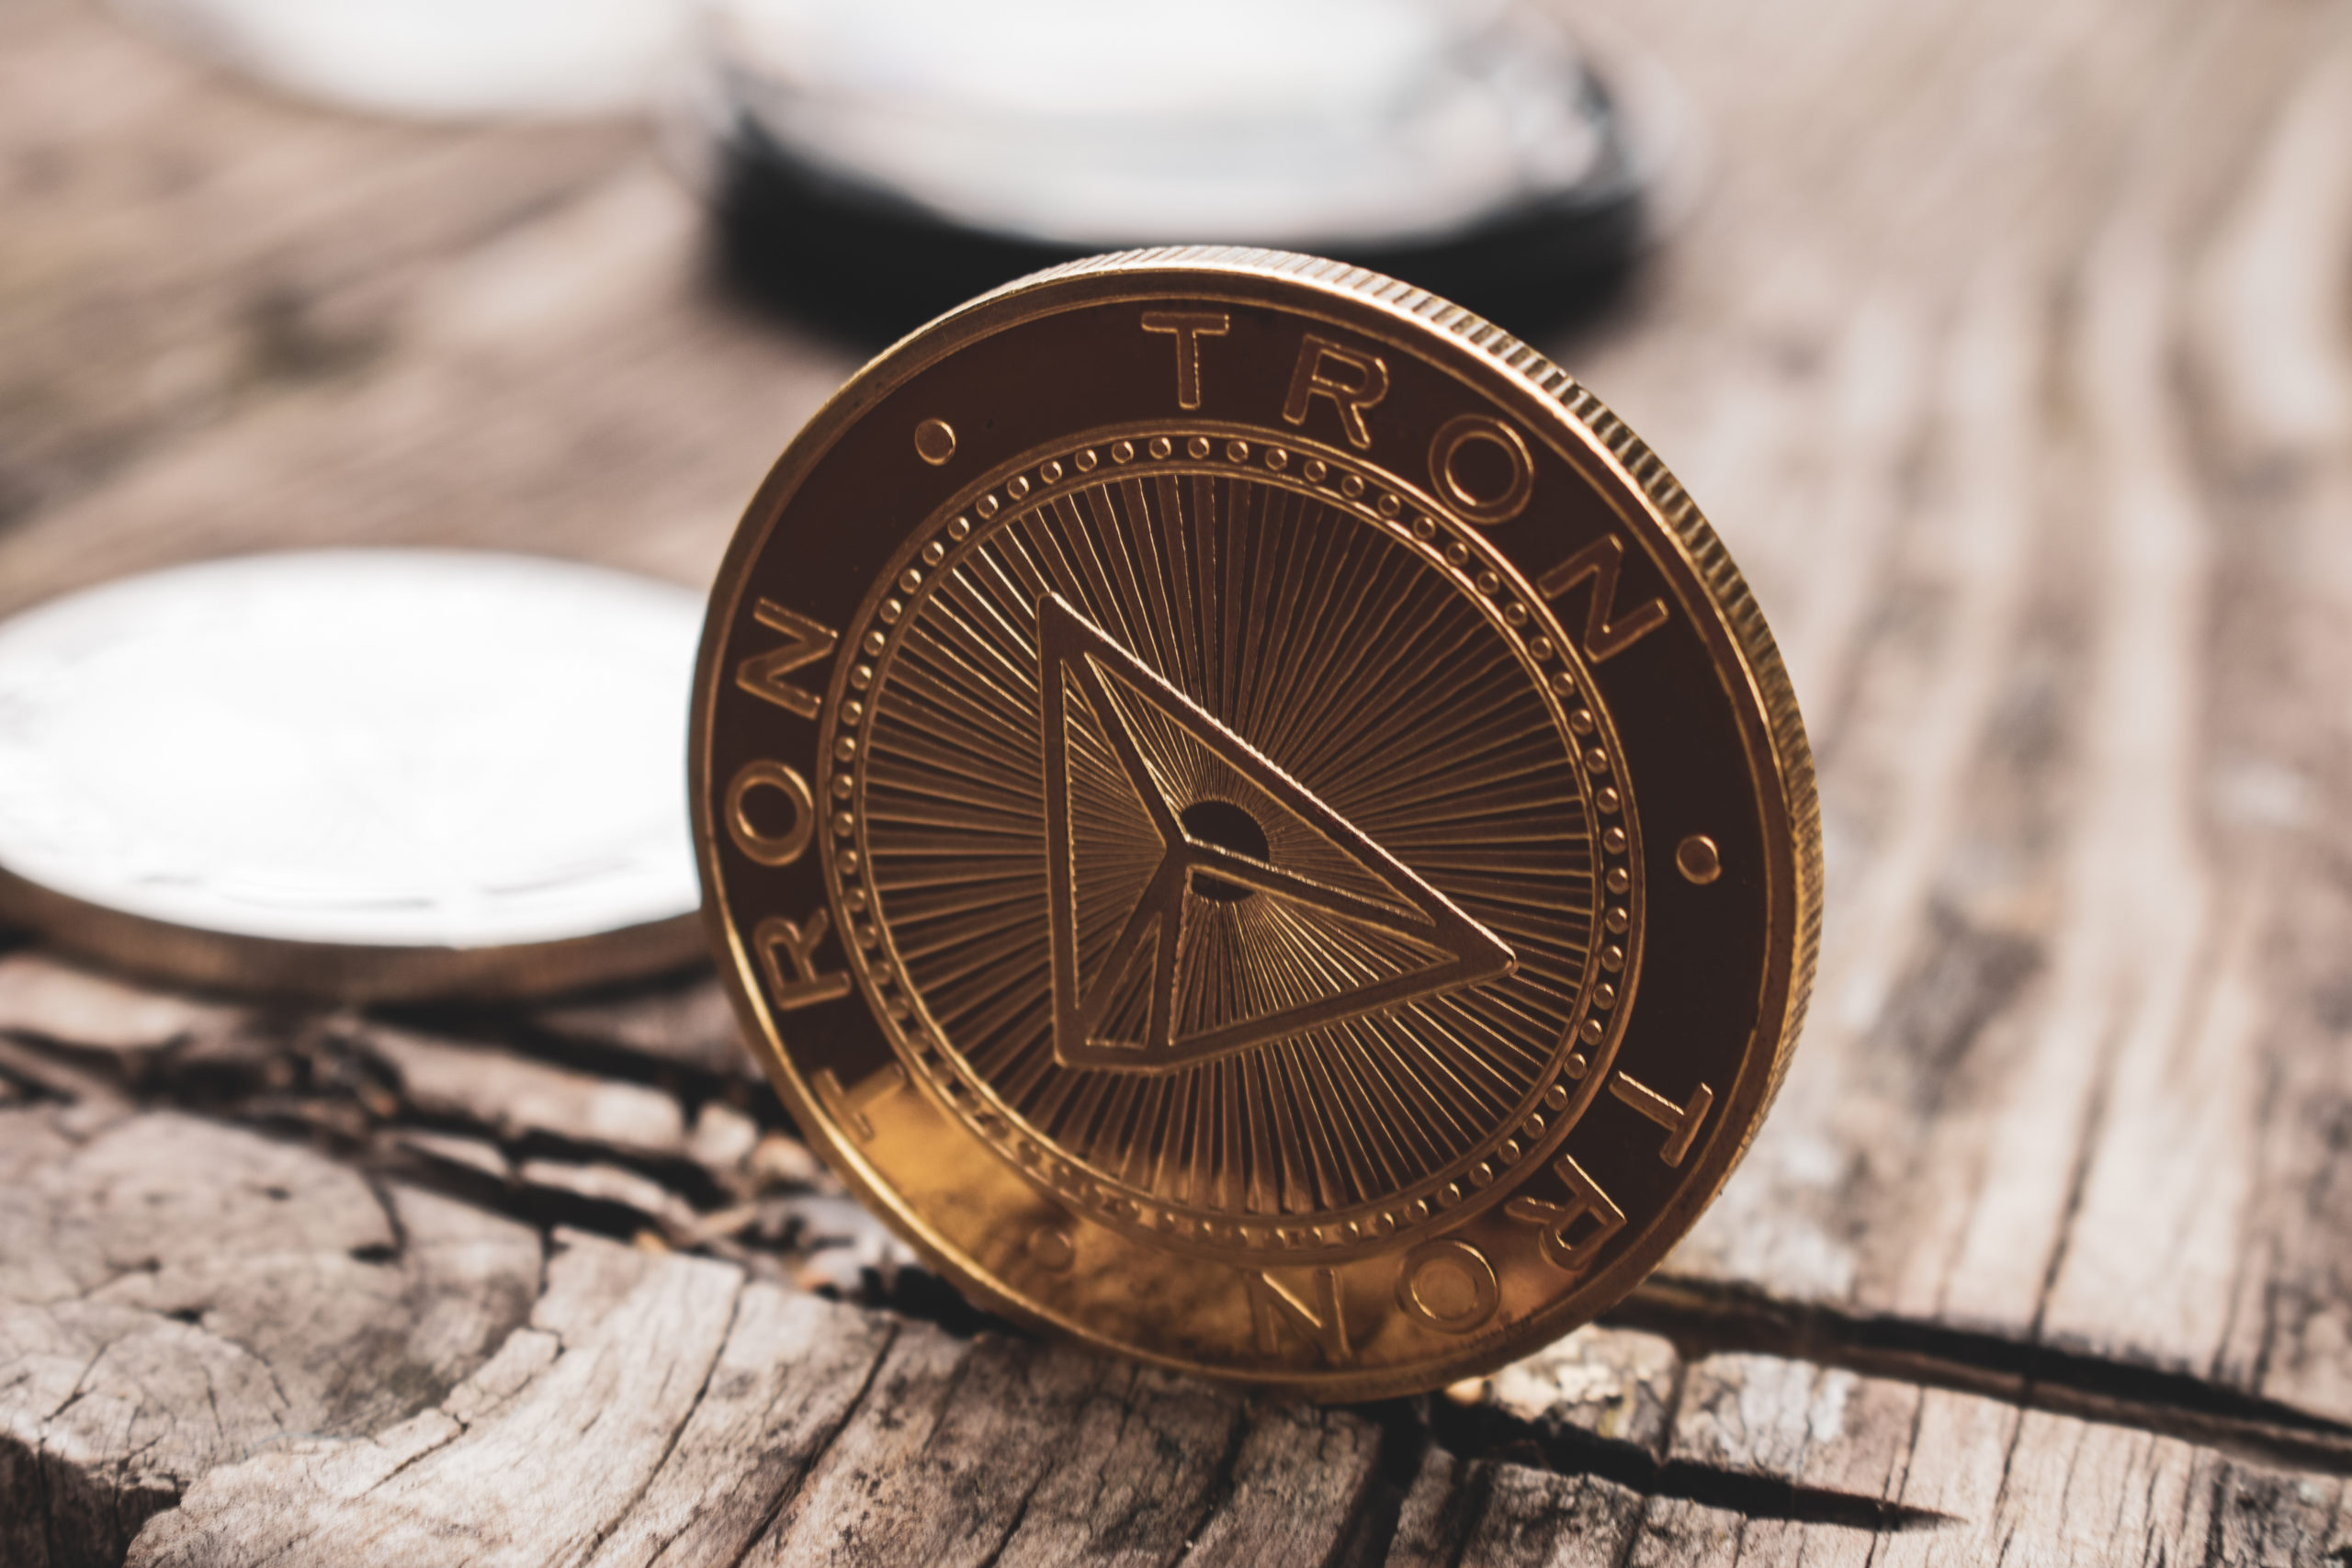 tron trx coin scaled 1 Blockchain.com lists TRON token TRX in its wallet and exchange